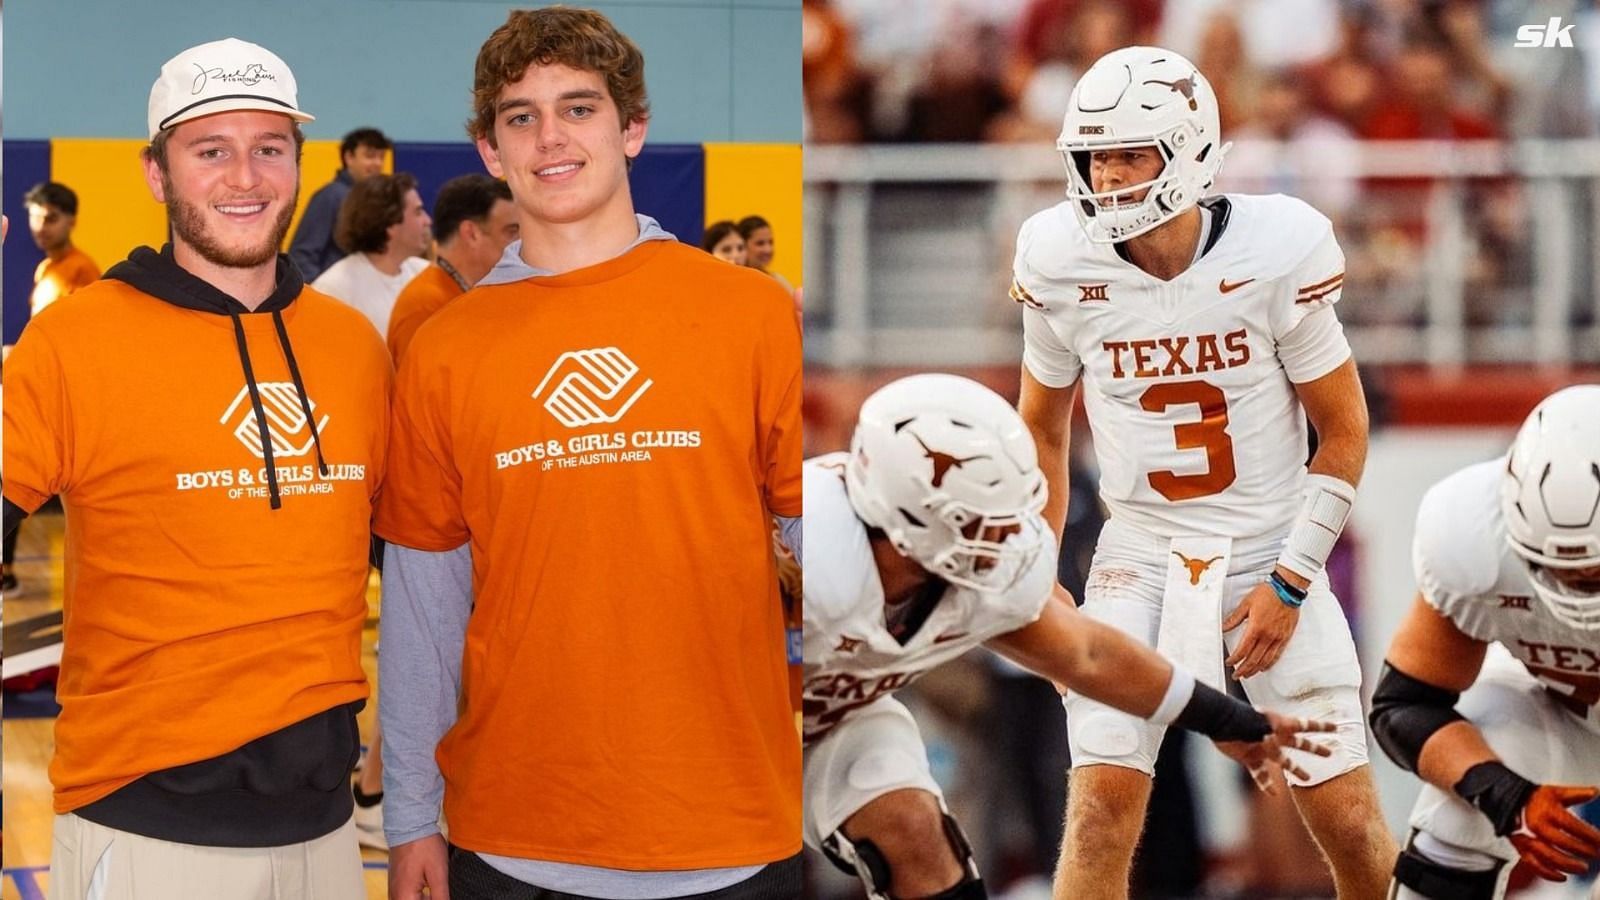 Texas QB Arch Manning leads Longhorns clan at a social event